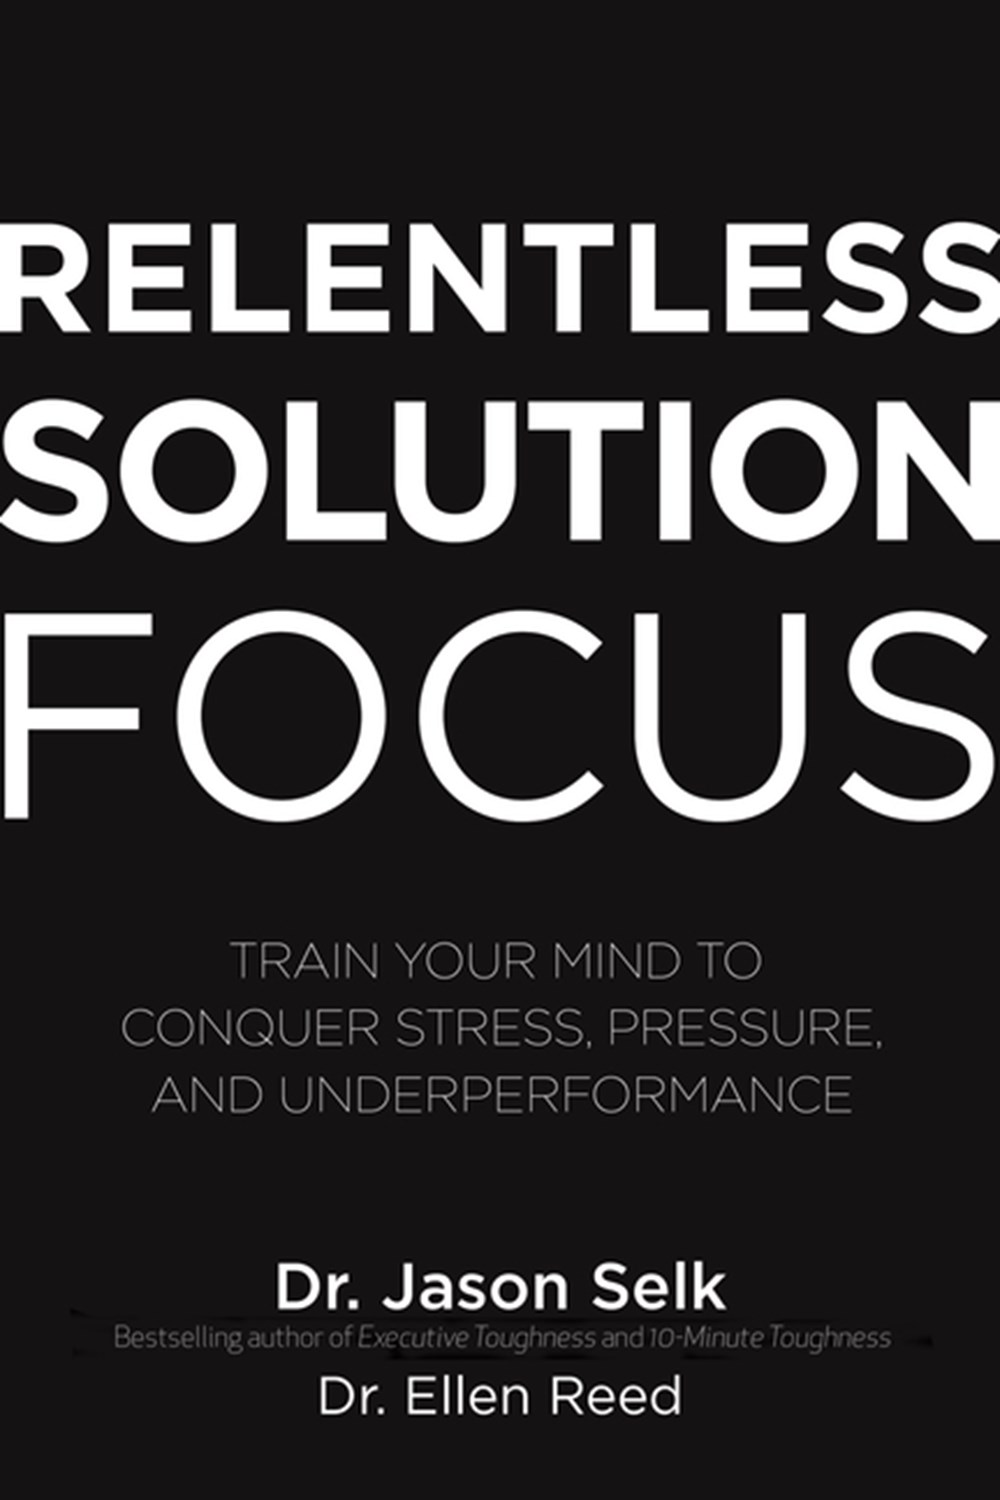 Relentless Solution Focus Train Your Mind to Conquer Stress, Pressure, and Underperformance